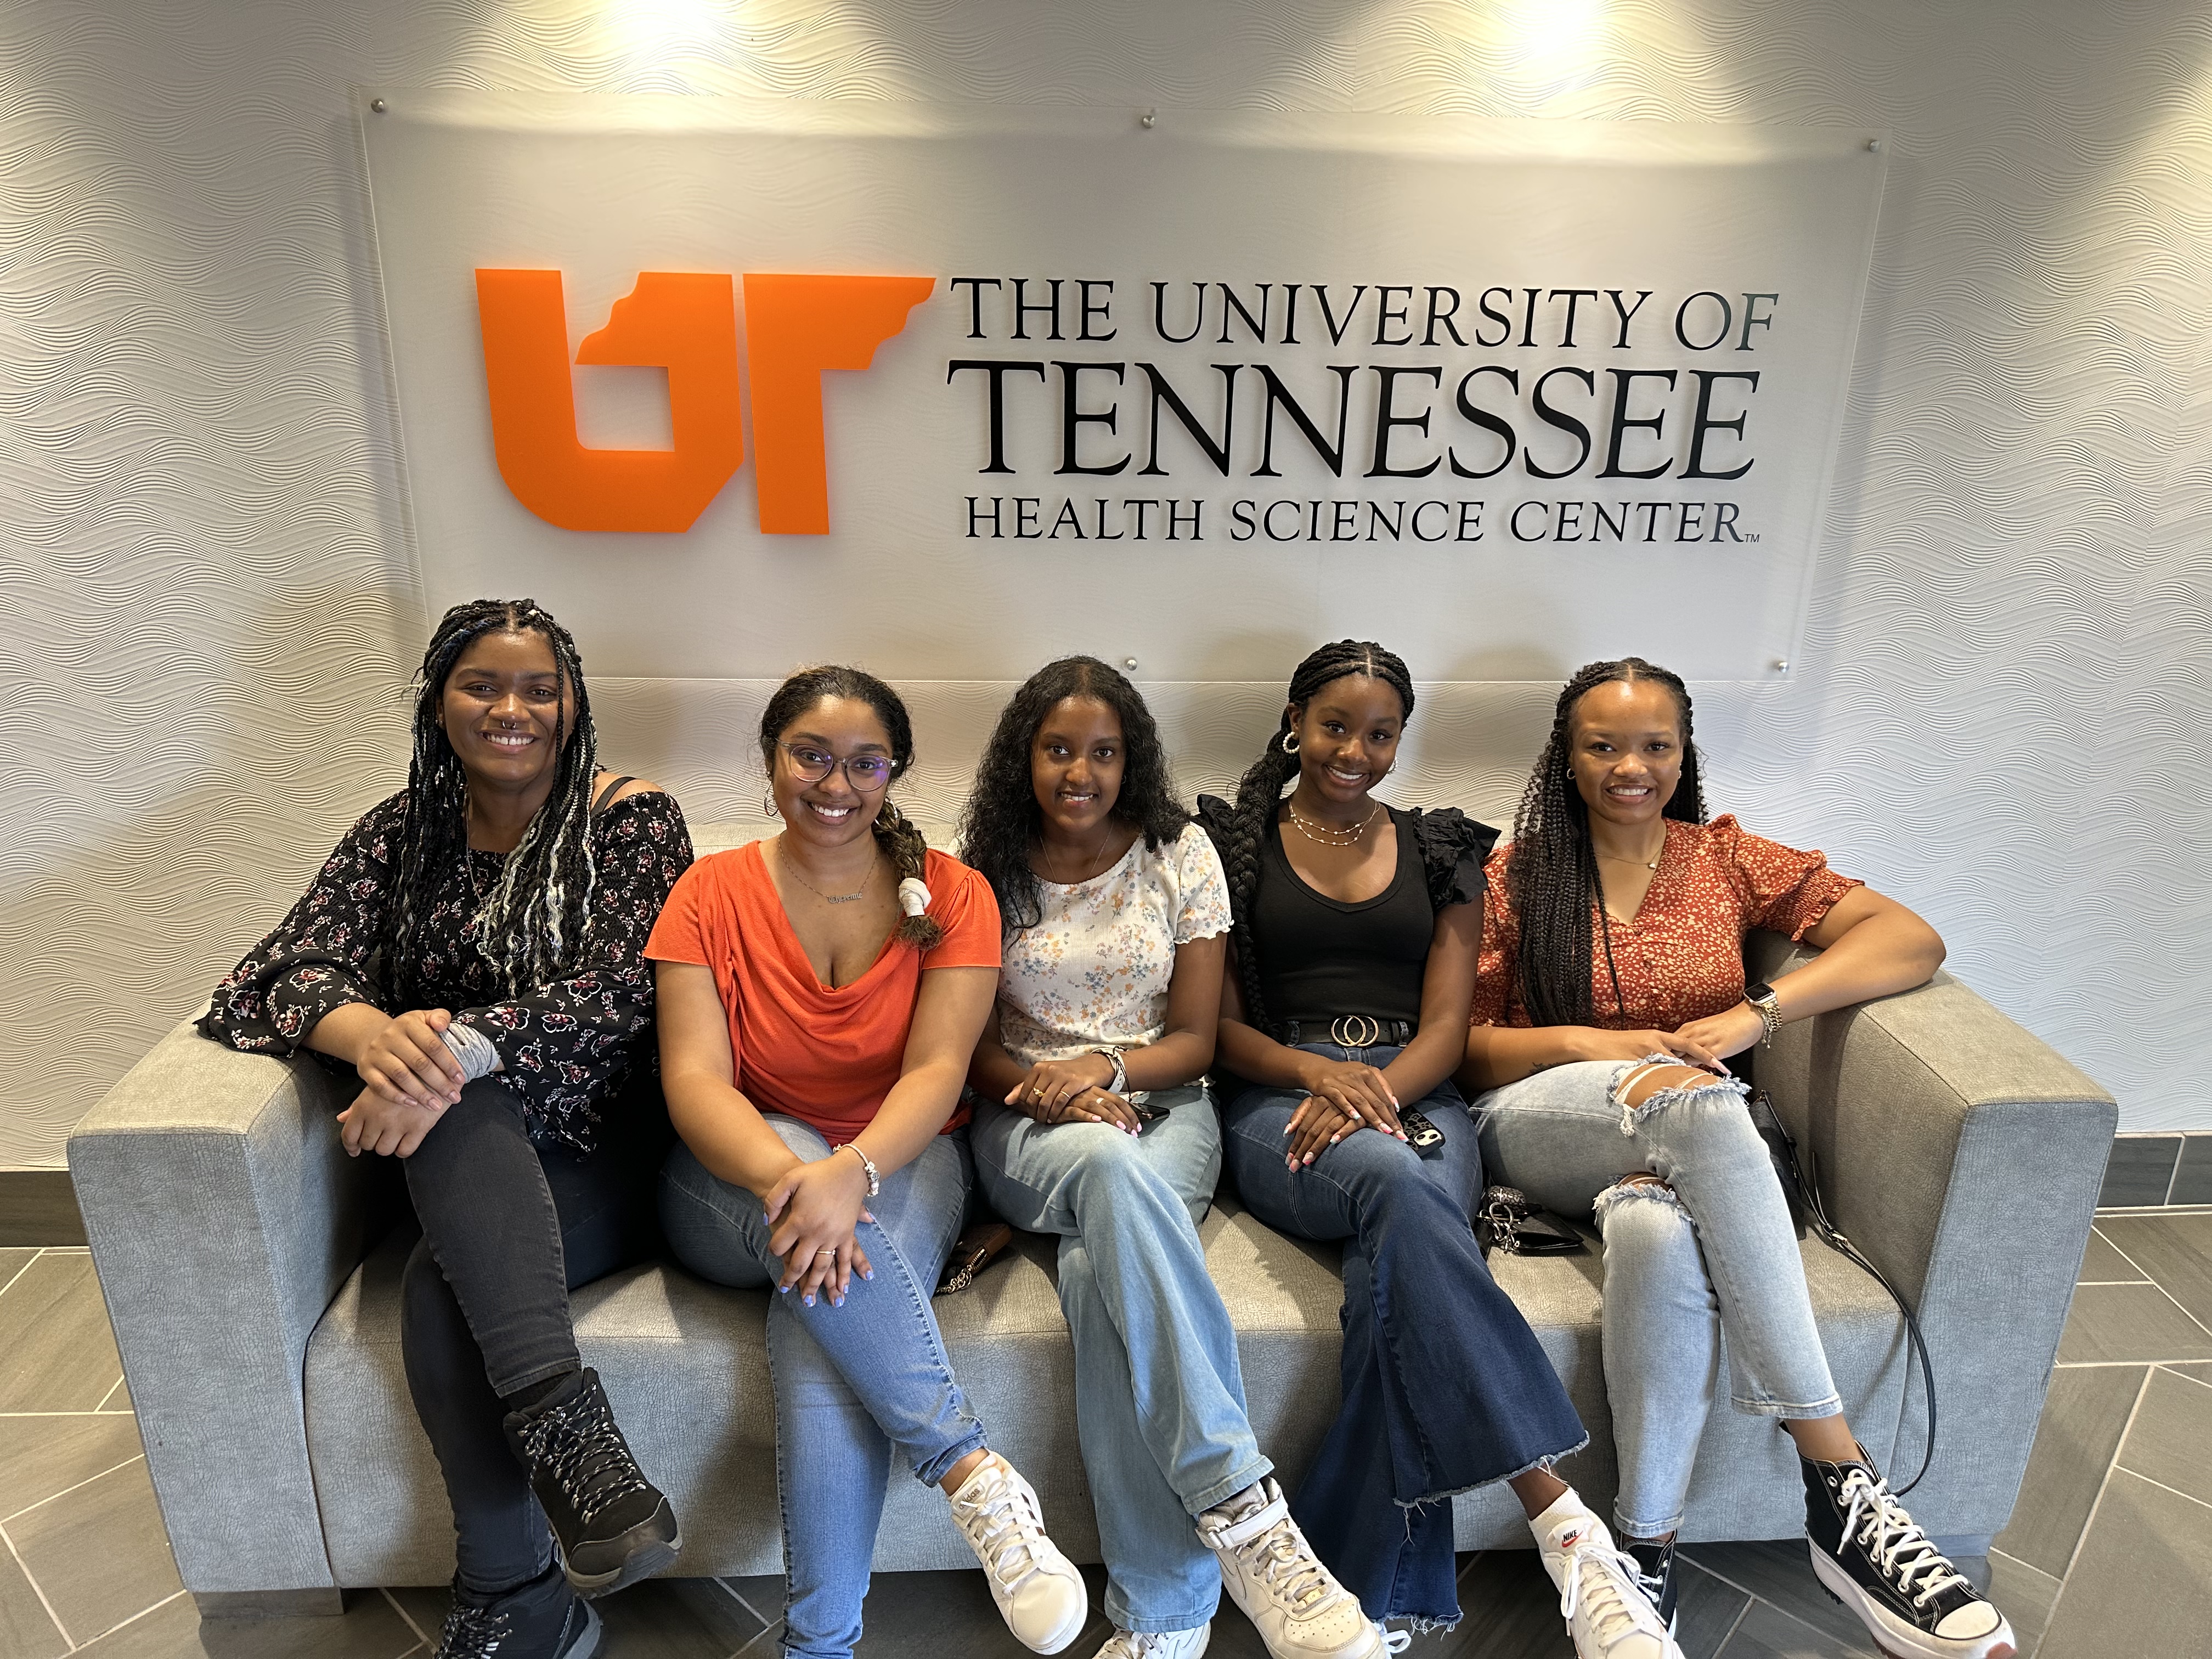 DOCC students toured The University of Tennessee Health Science Center